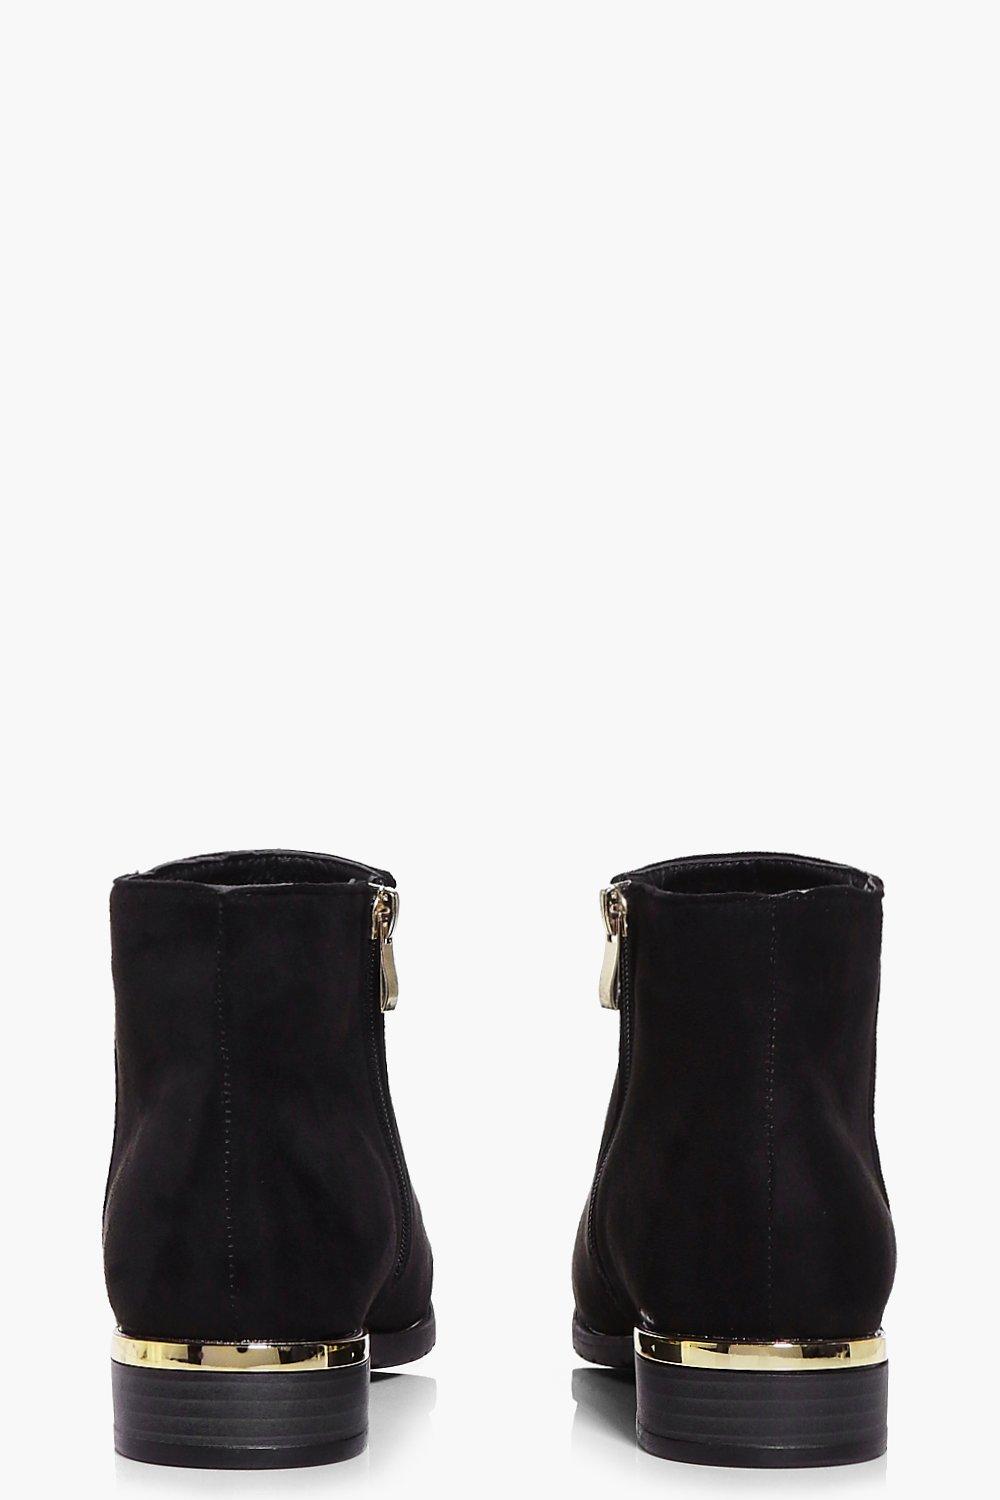 black and gold chelsea boots